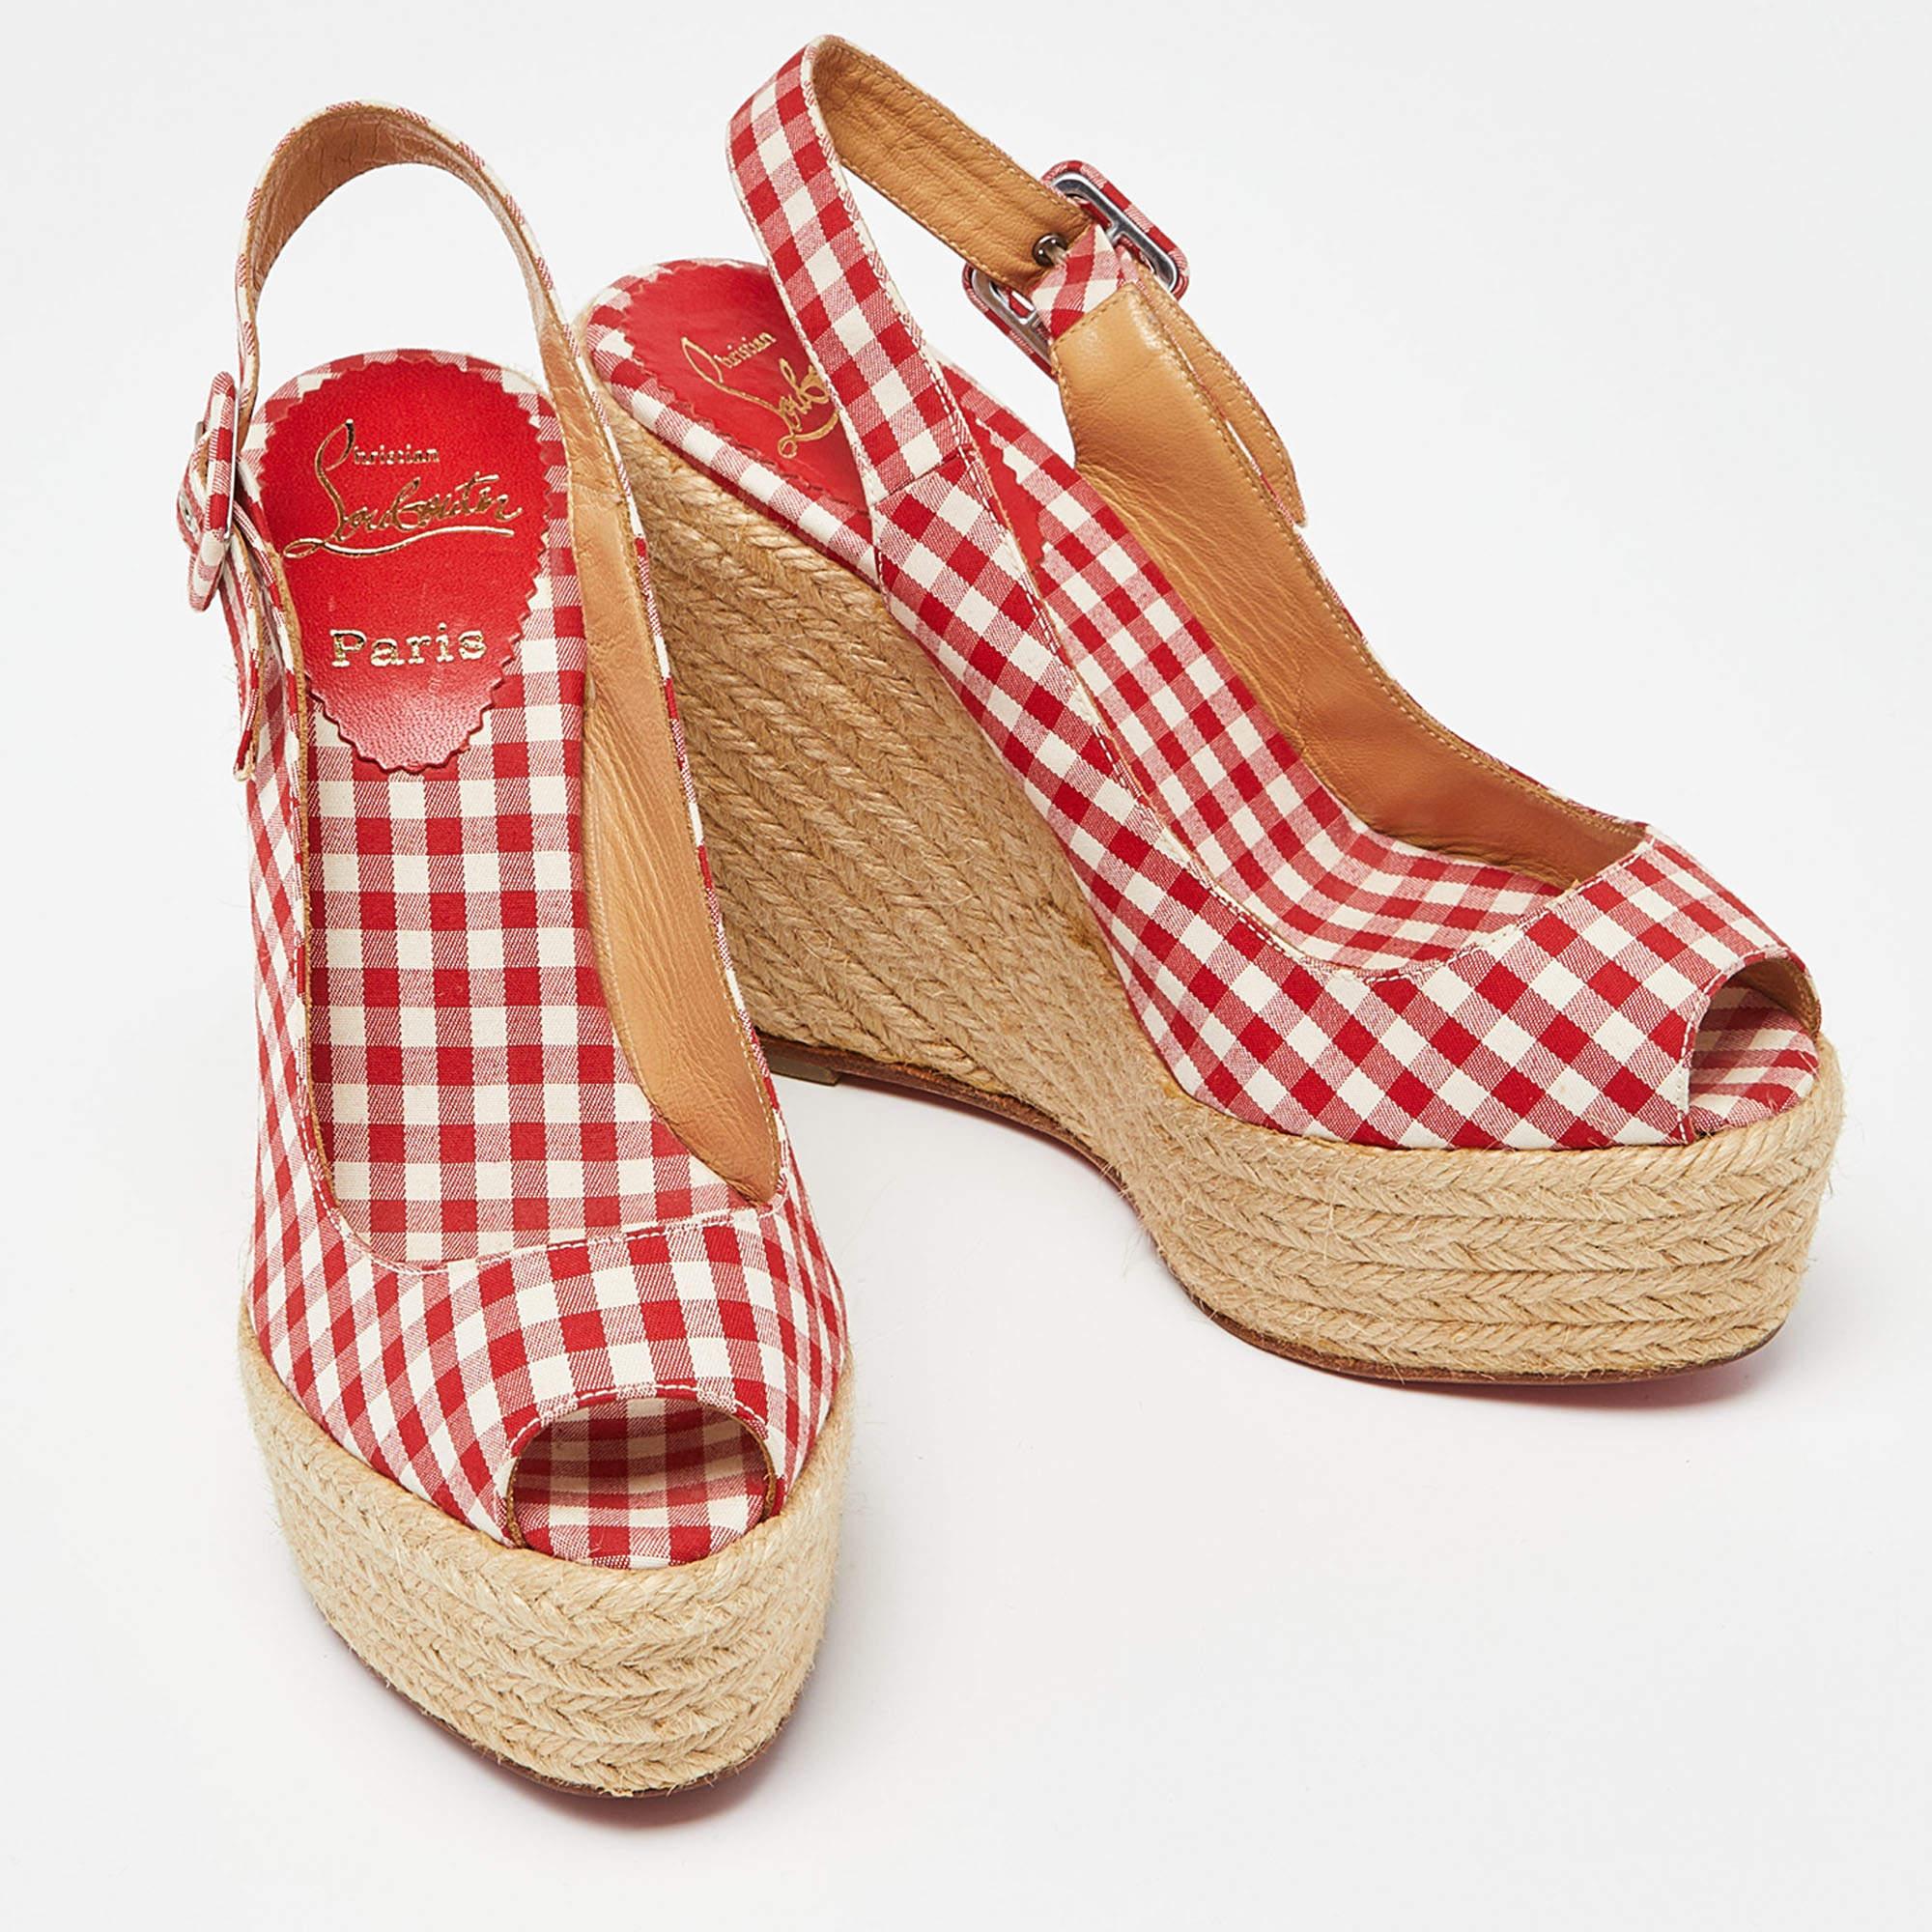 Christian Louboutin Red/White Gingham Fabric Menorca Espadrille Wedge Size 37 In Good Condition For Sale In Dubai, Al Qouz 2